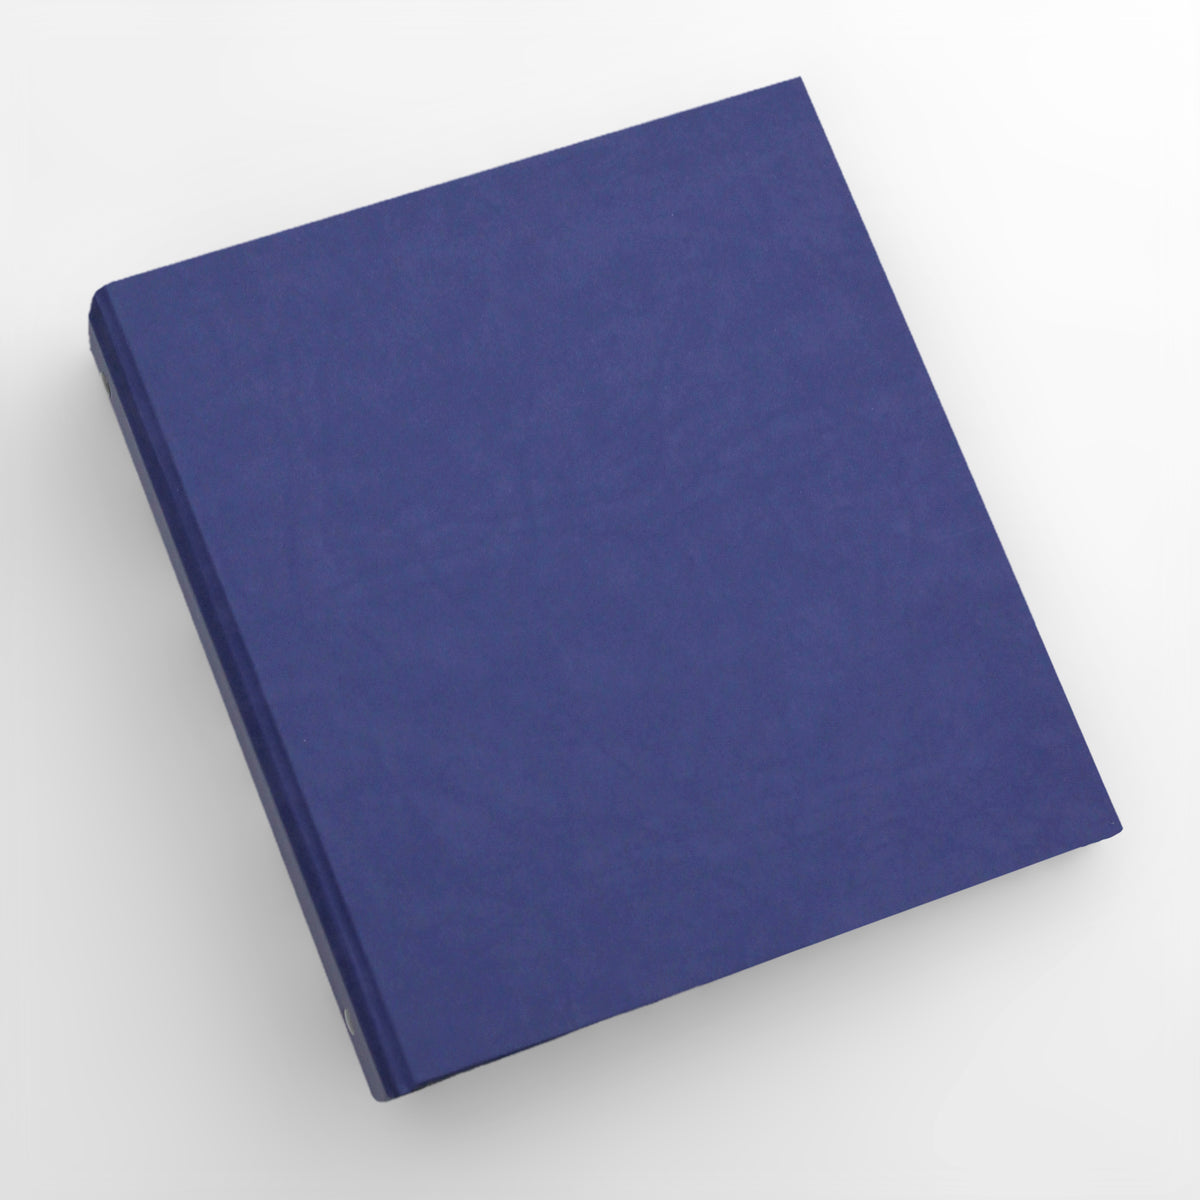 Large Photo Binder For 4x6 Photos | Cover: Indigo Vegan Leather | Available Personalized